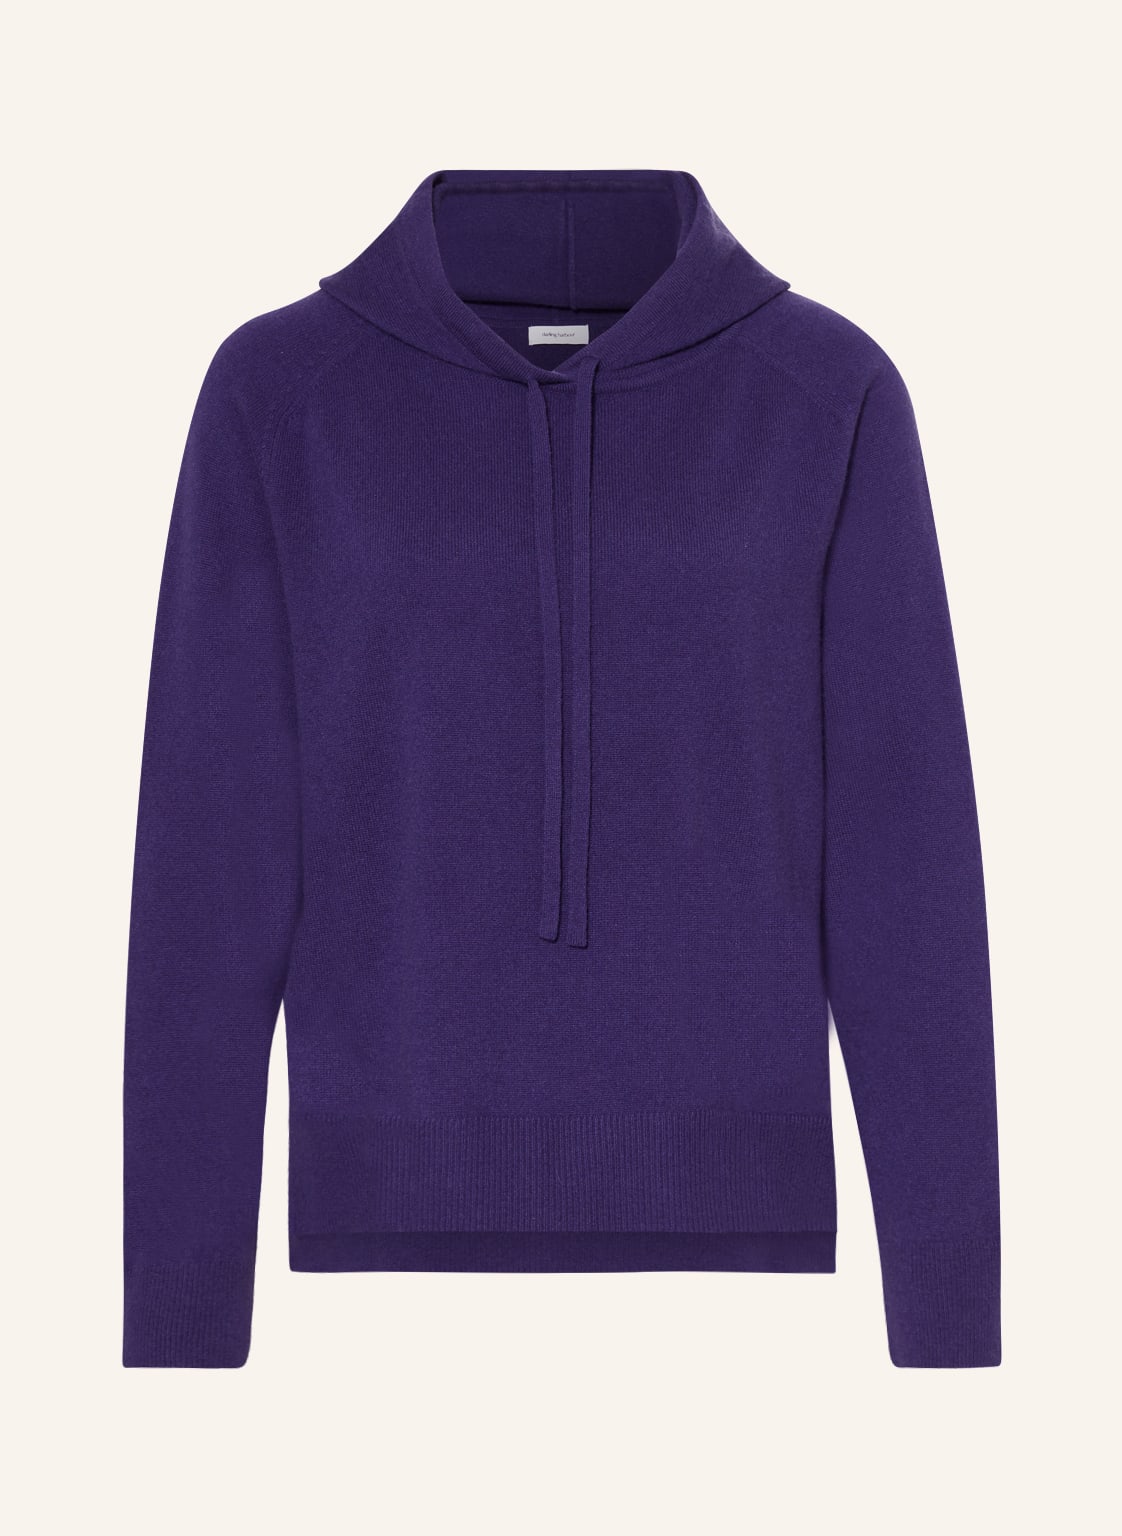 Darling Harbour Cashmere-Hoodie lila von darling harbour